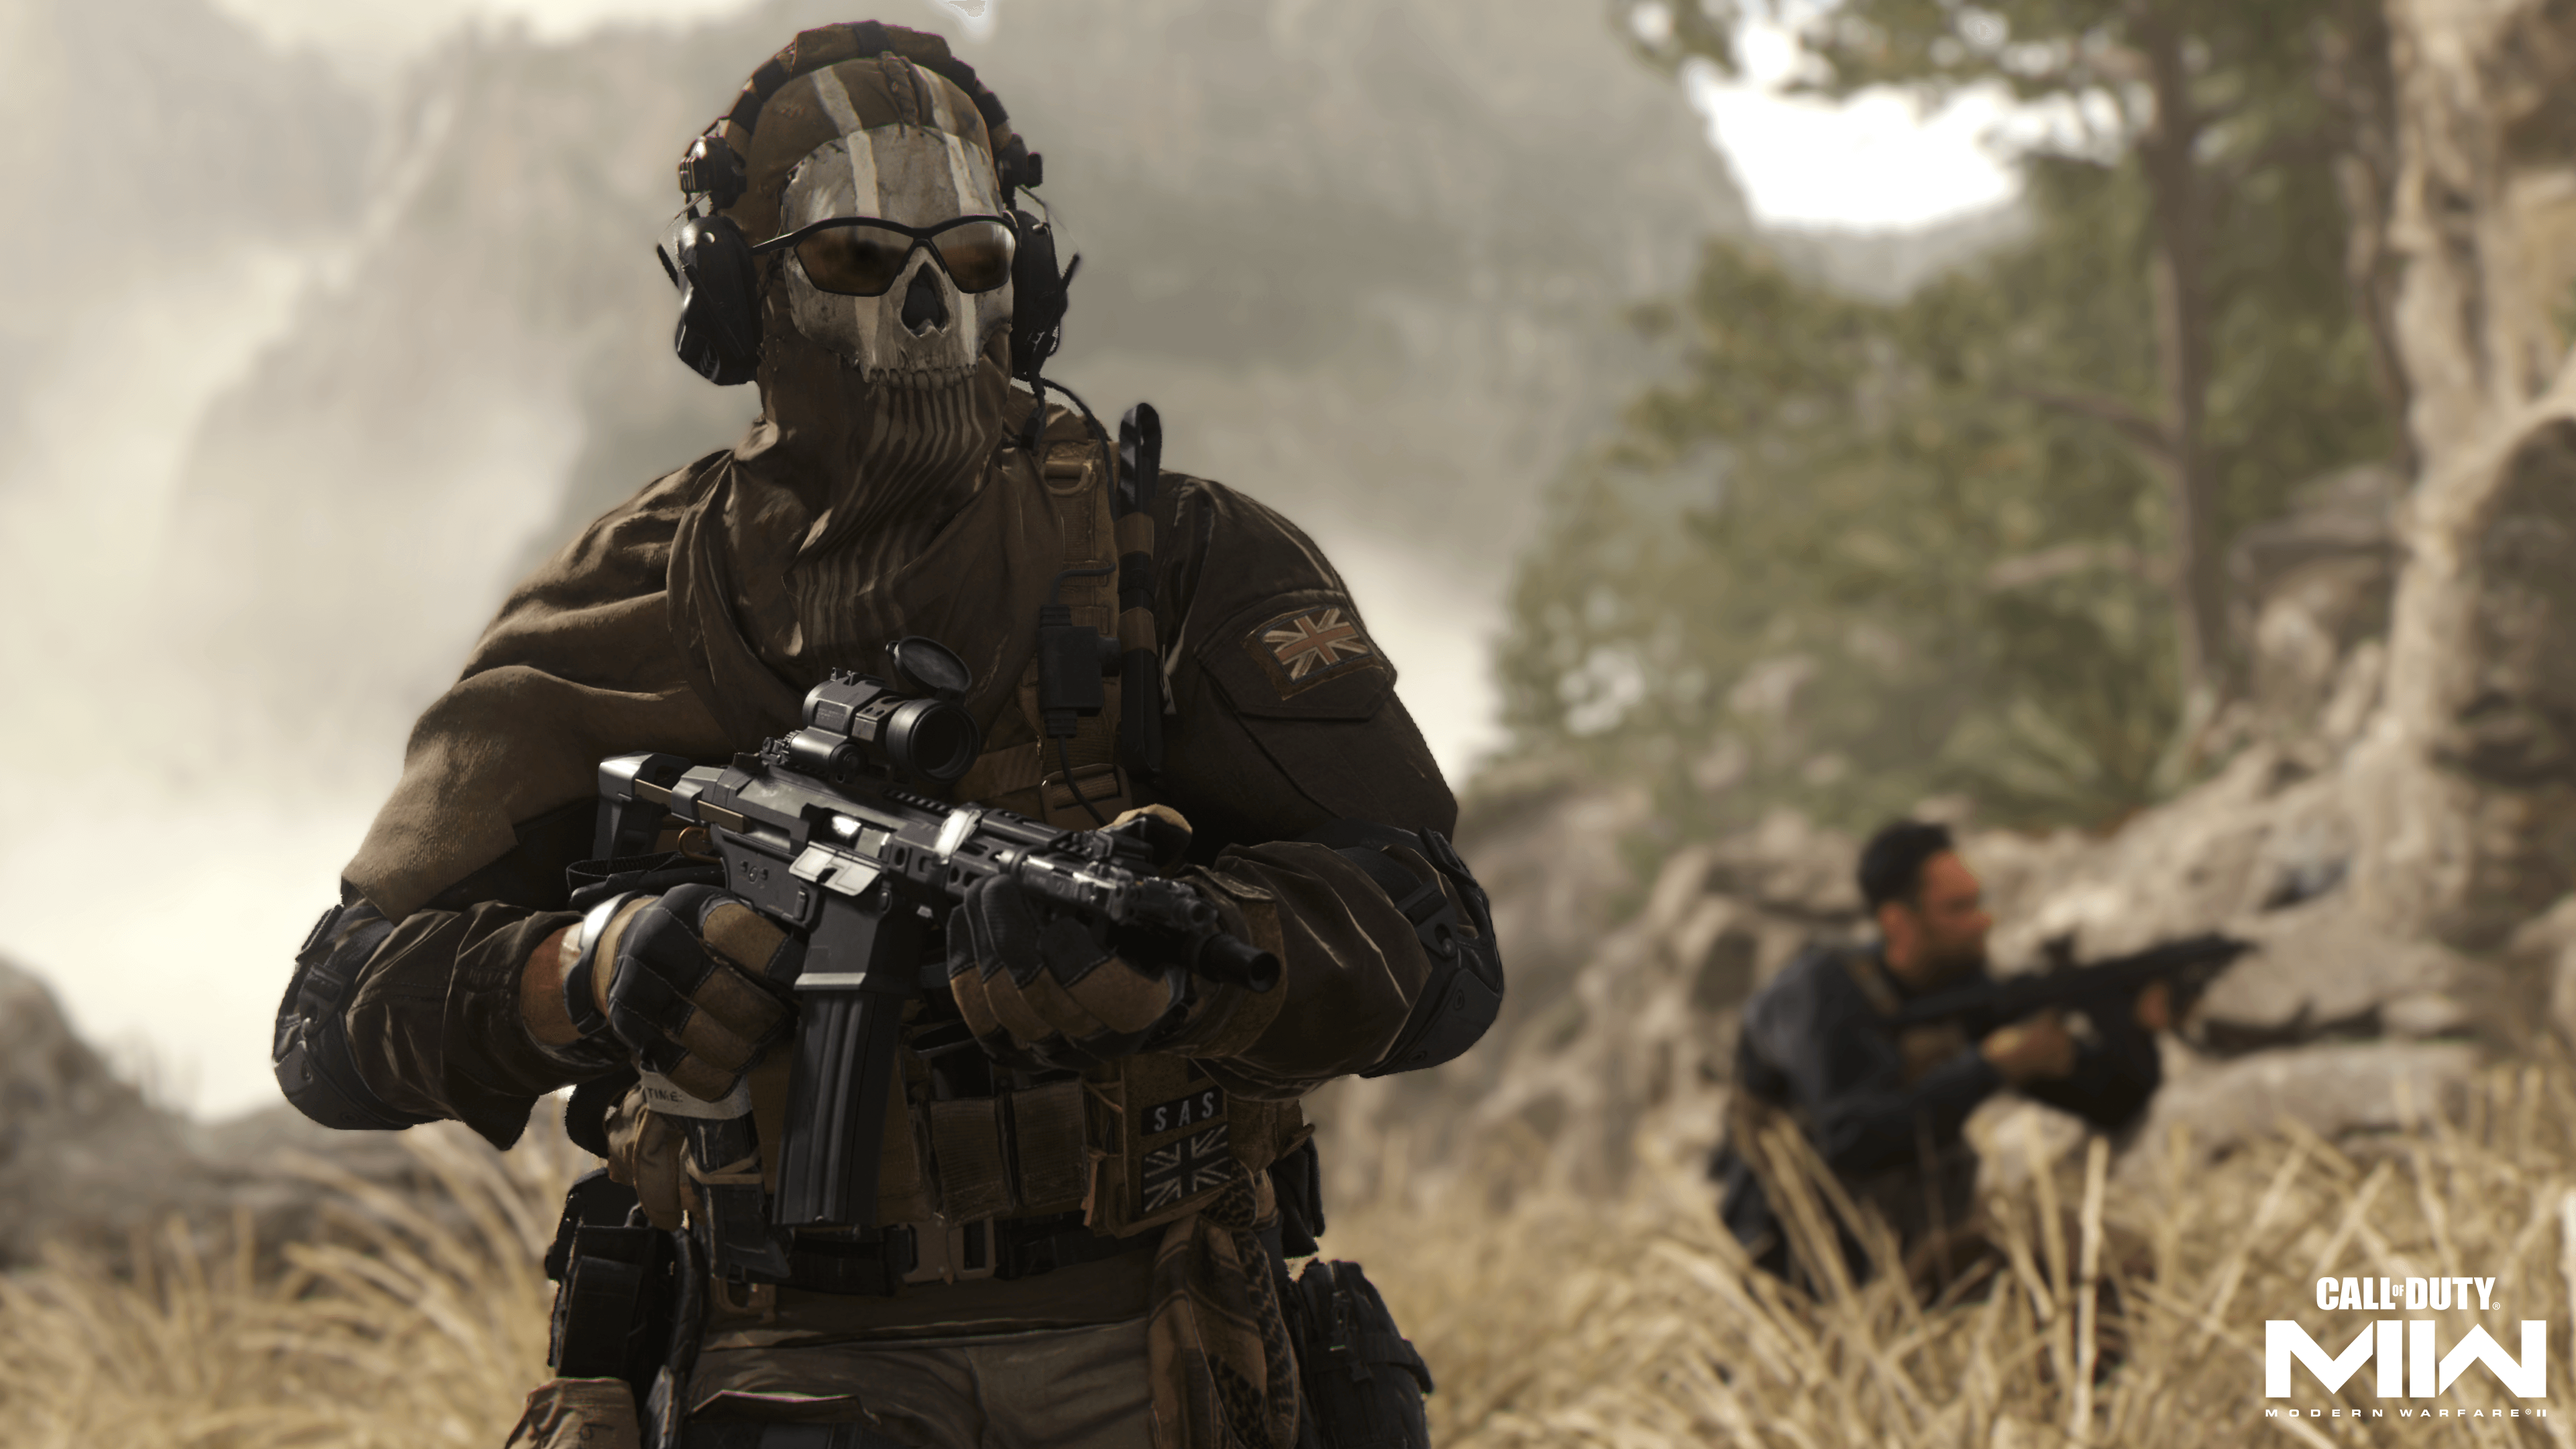 Call of Duty Coming To Nintendo Thanks To New 10-Year Deal